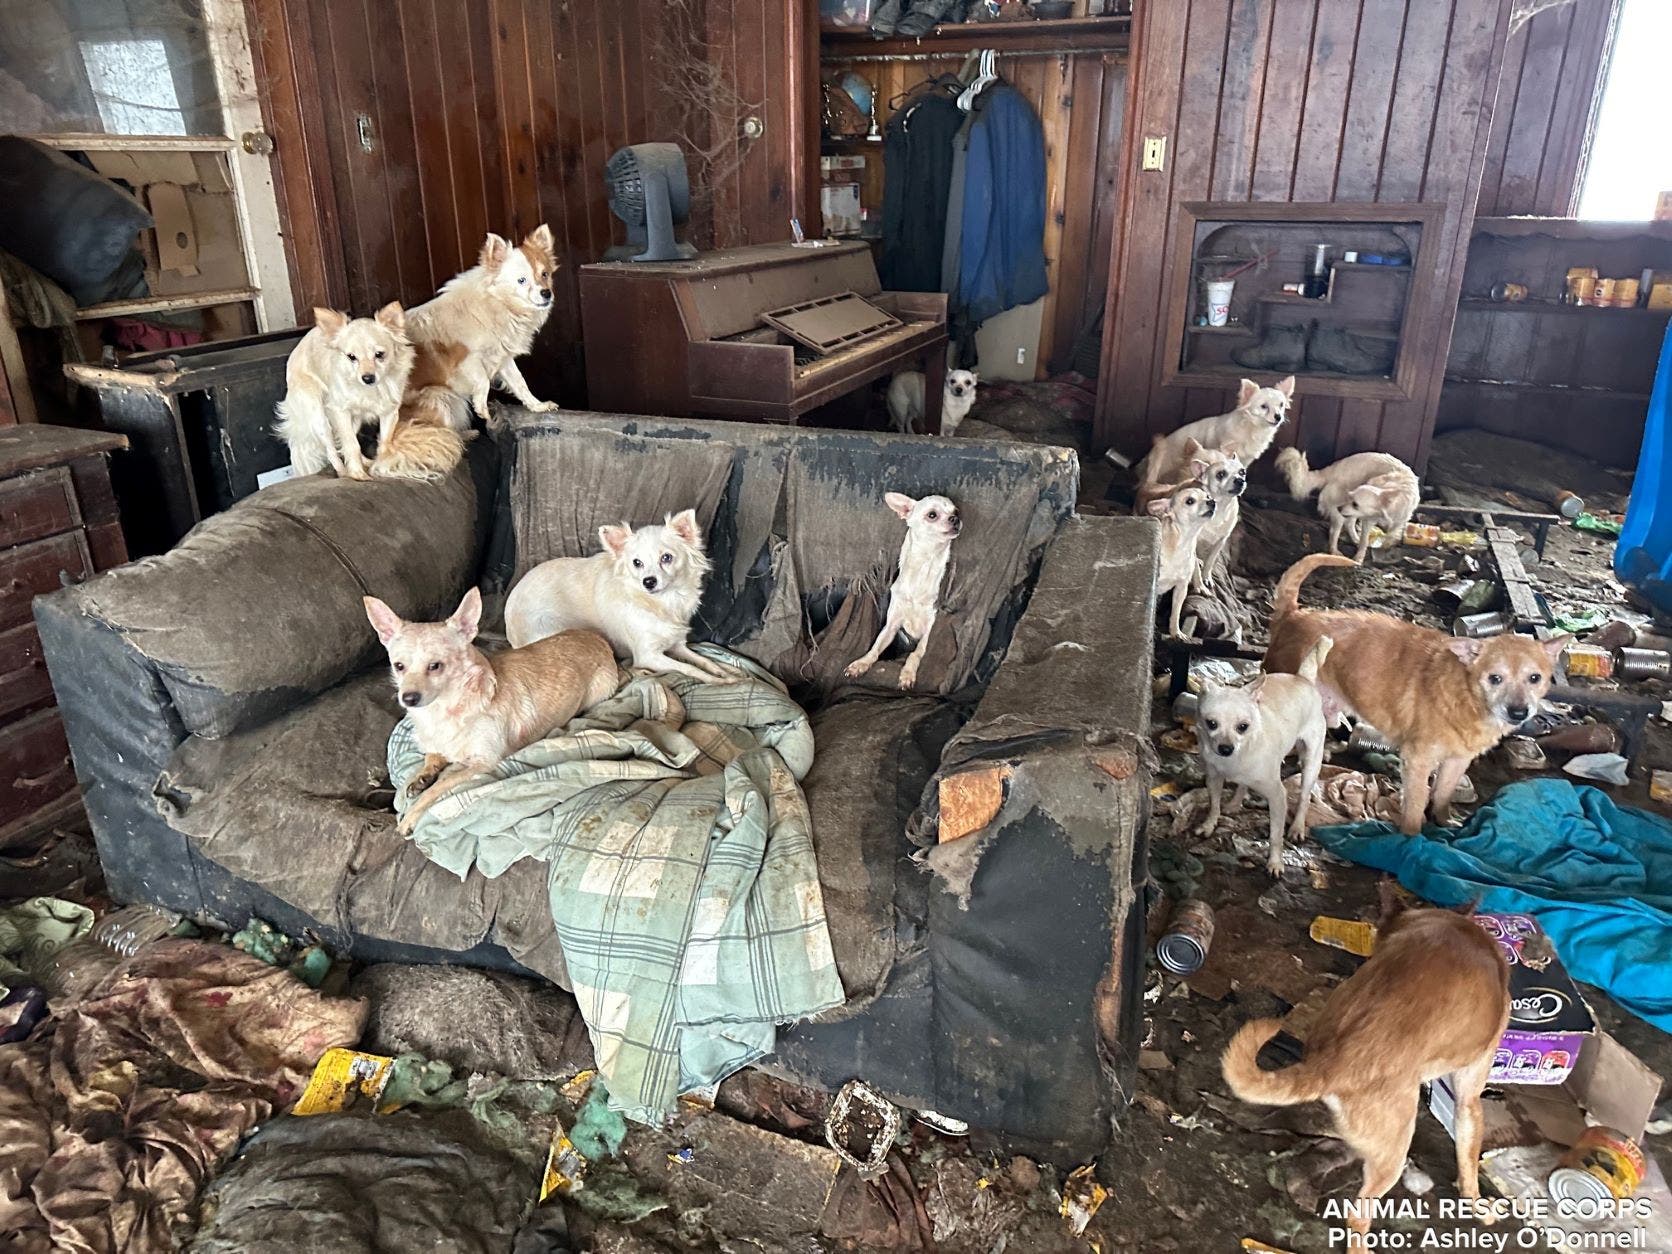 Tennessee police discover 76 dogs living in abandoned home: report